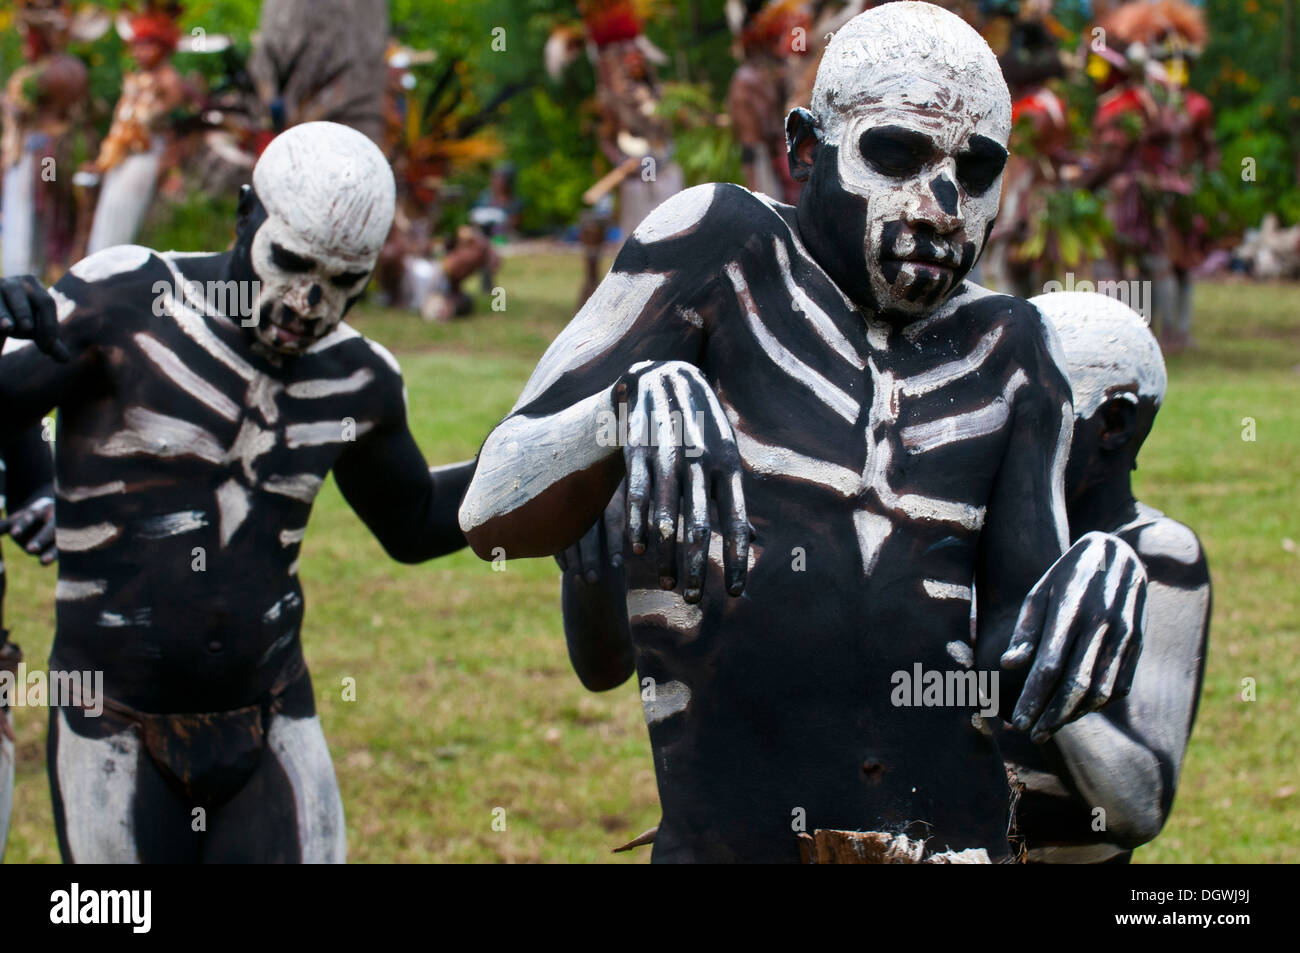 Men with skeleton body paint are celebrating at the traditional Sing Sing gathering in the highlands, Paya, Papua New Guinea Stock Photo